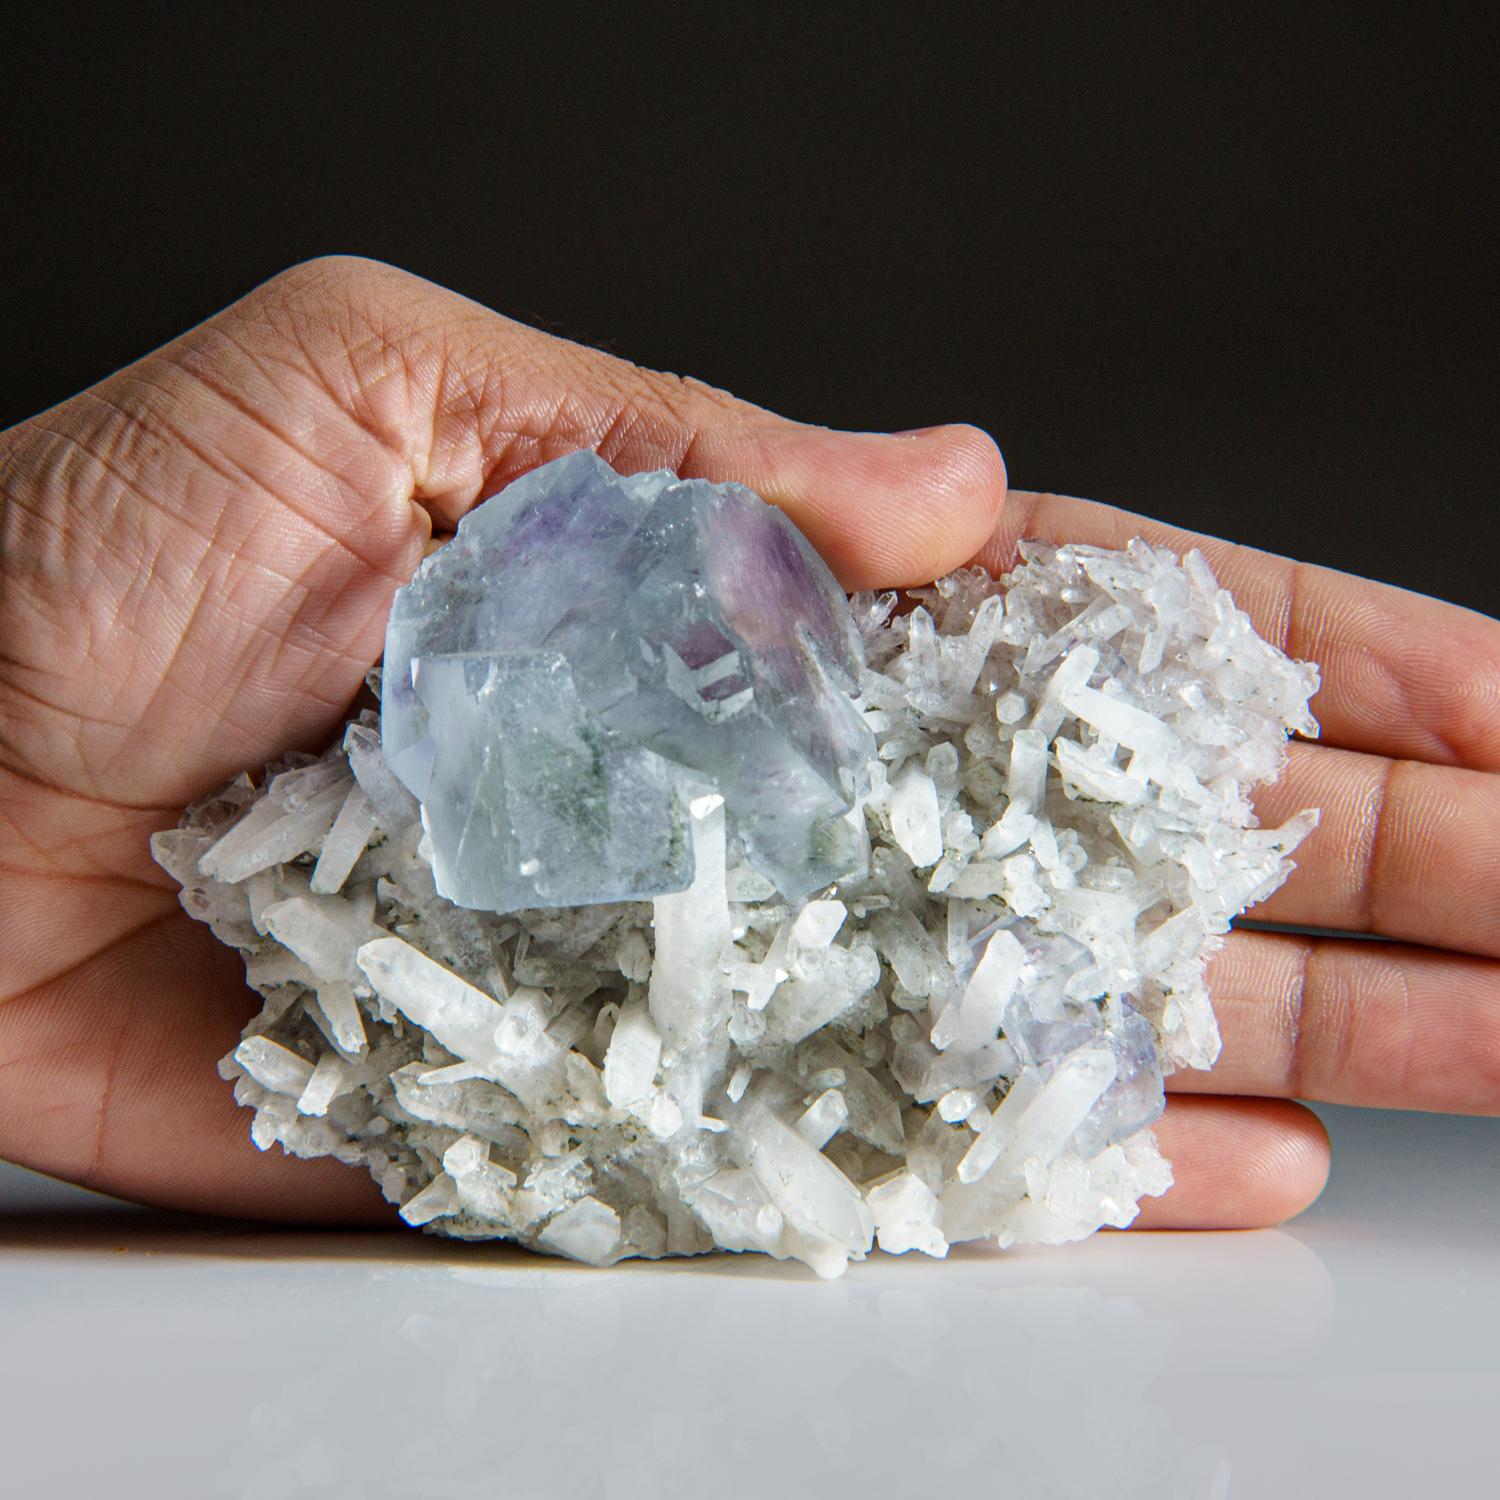 Purple and Blue Fluorite on Quartz from De'an Mine, Wushan, Jiangxi Province, China

Lustrous blue green transparent fluorite crystal with a few pale-purple transparent purple fluorite crystals on white quartz point crystals. The quartz crystals